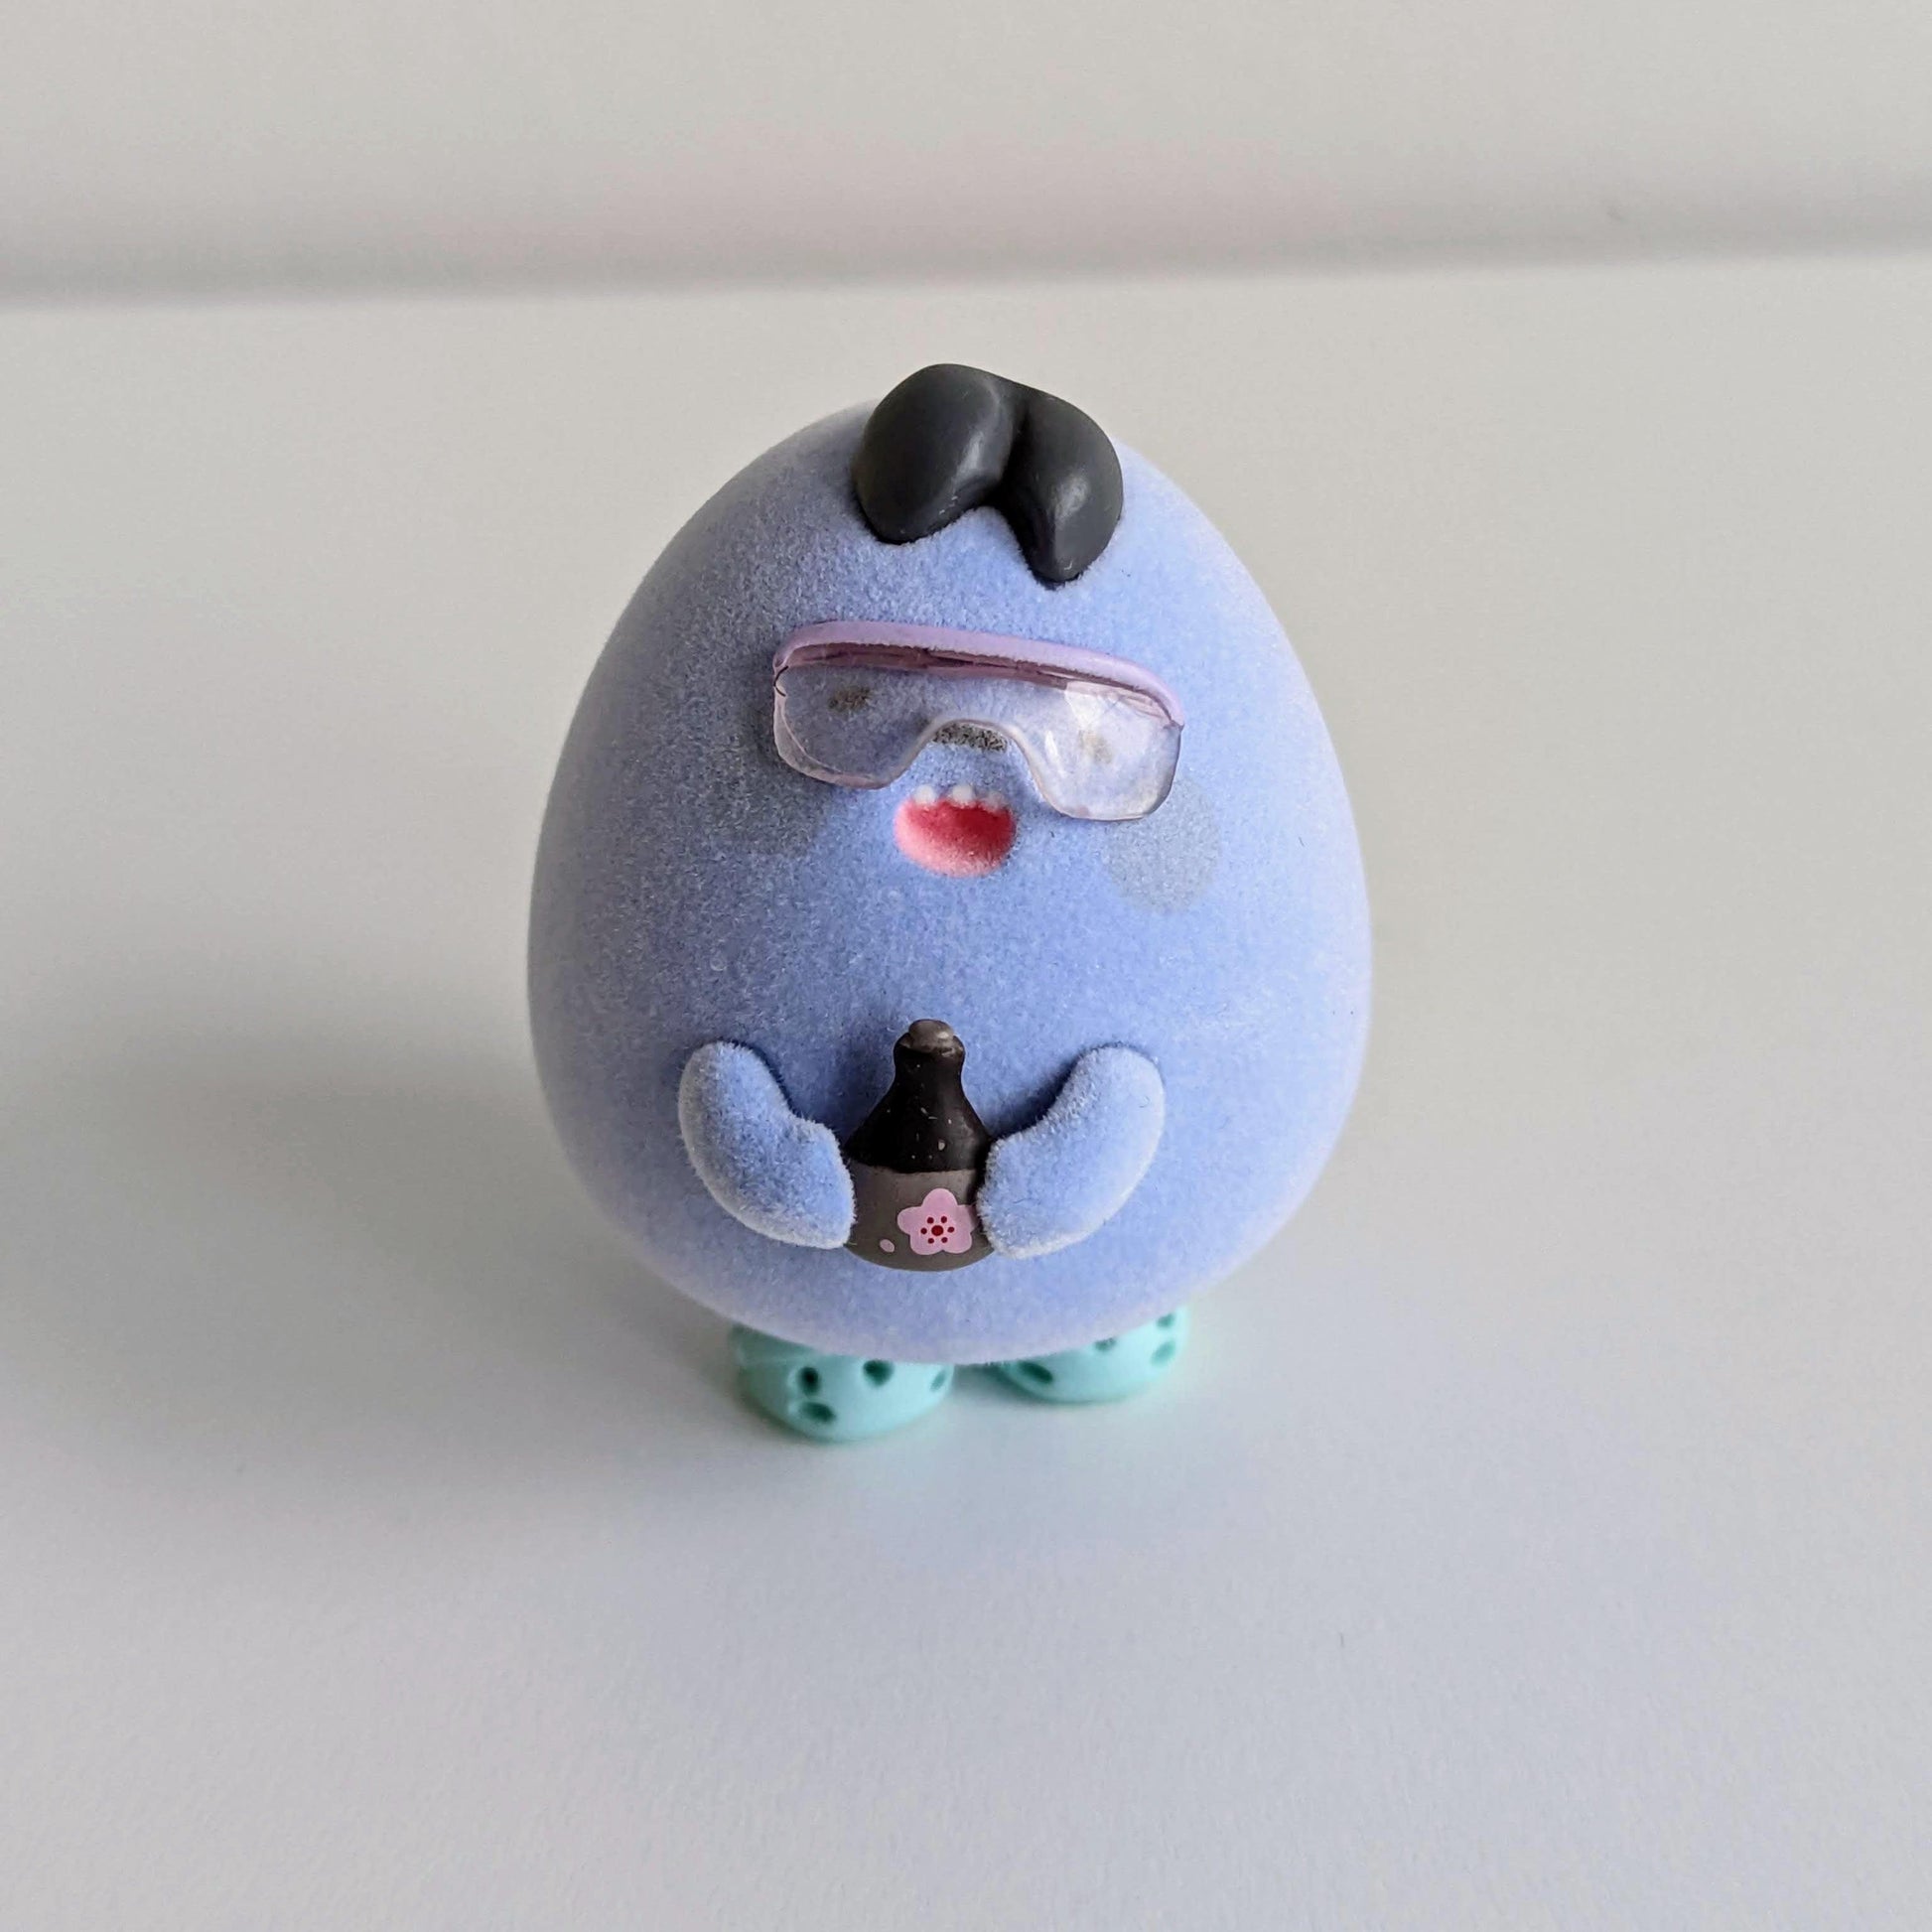 TOYCITY x POMPON Monster Series Brewers Mini Figure - Moko's Boutique